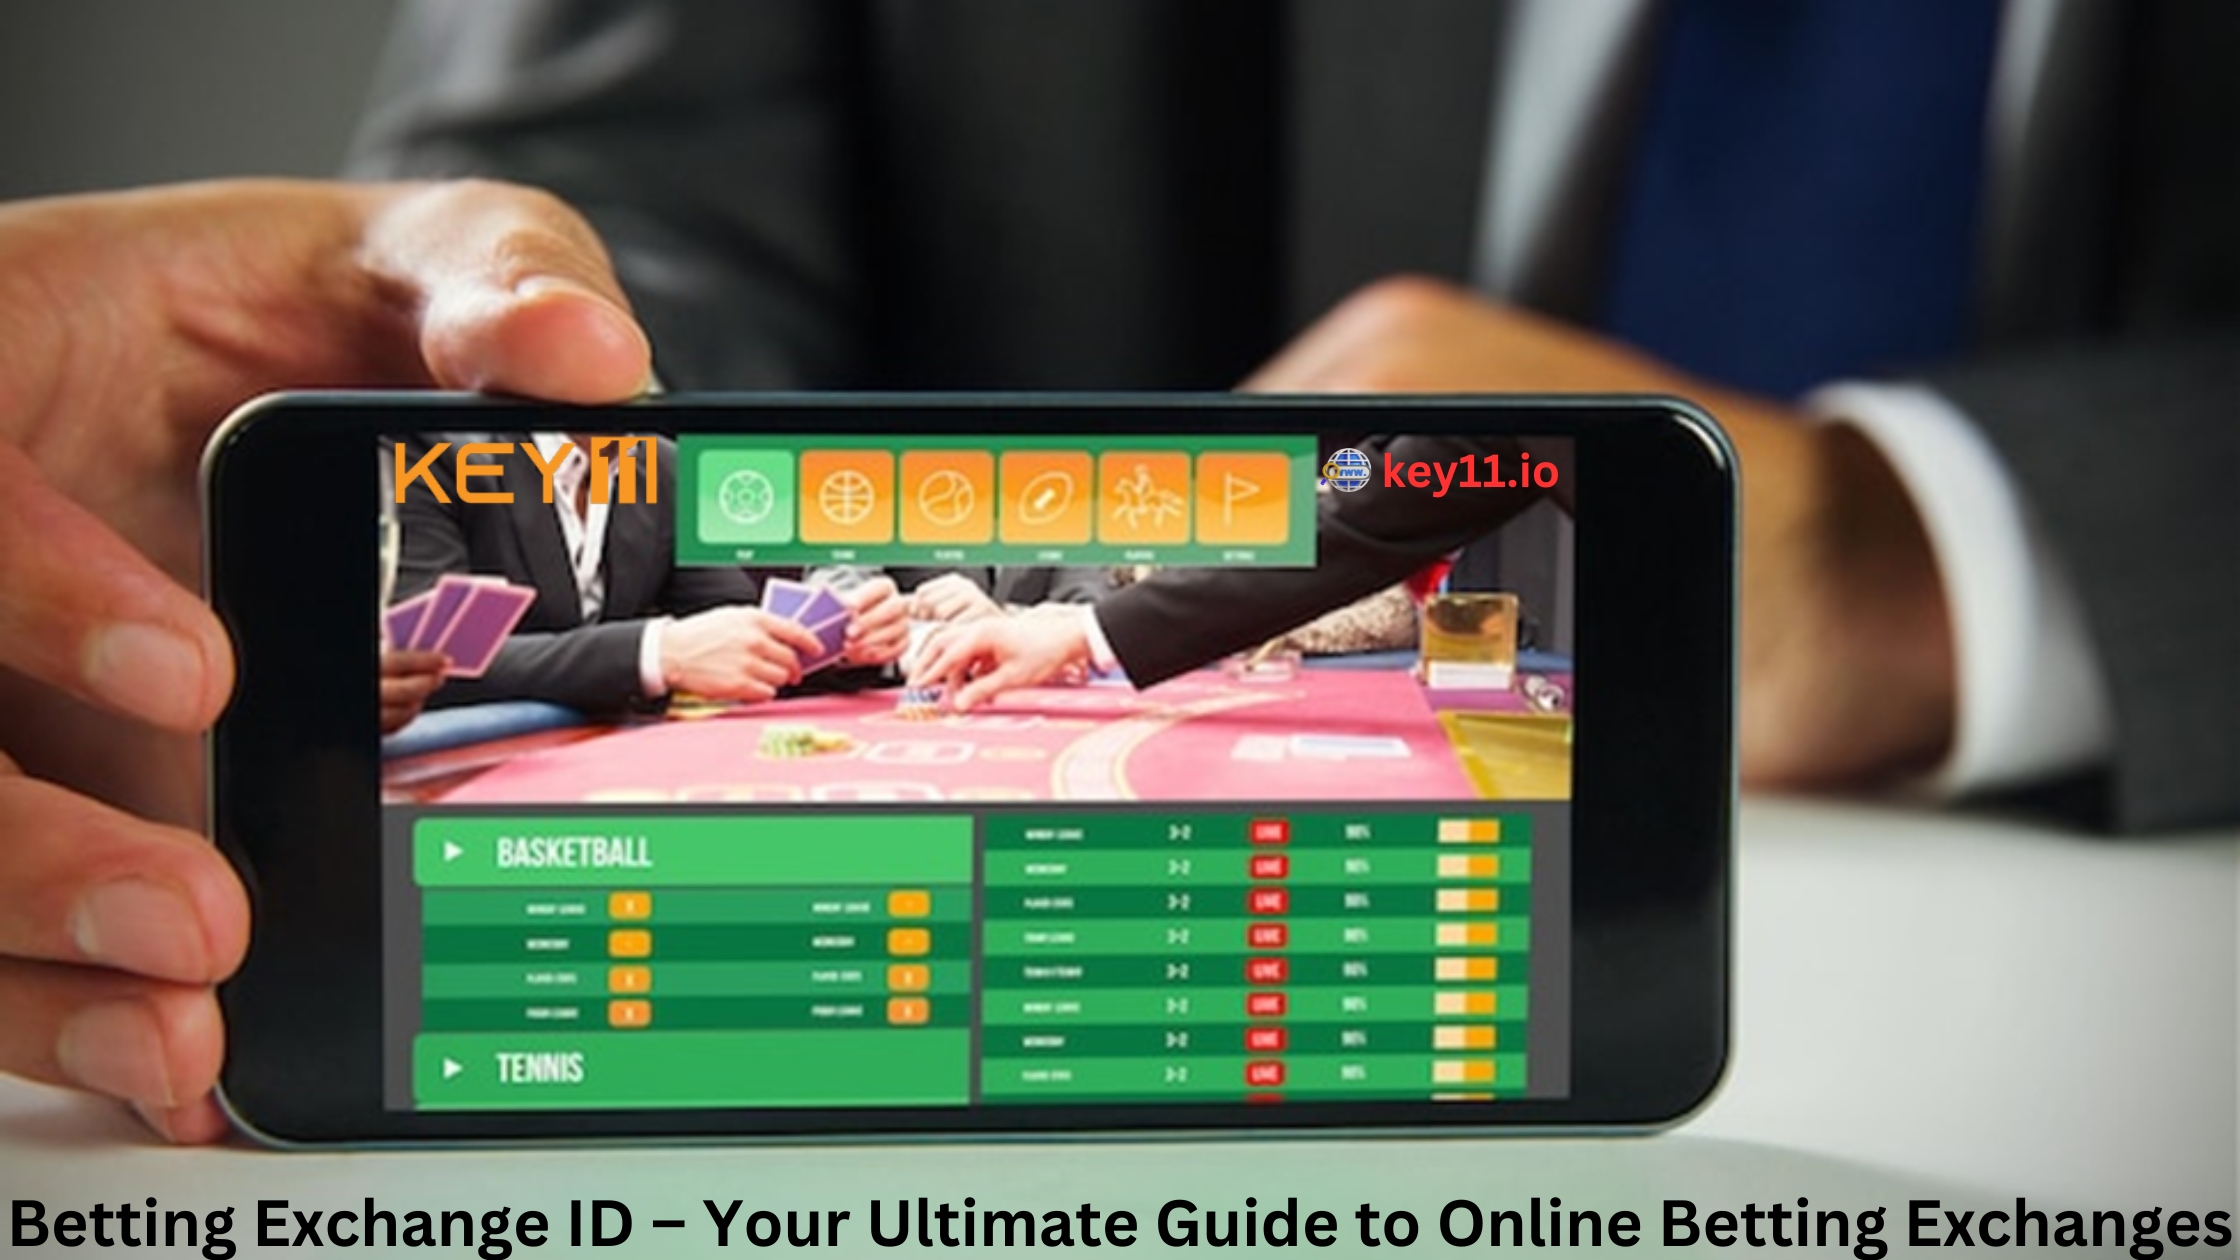 Your Ultimate Guide to Online Betting Exchanges- key 11 app